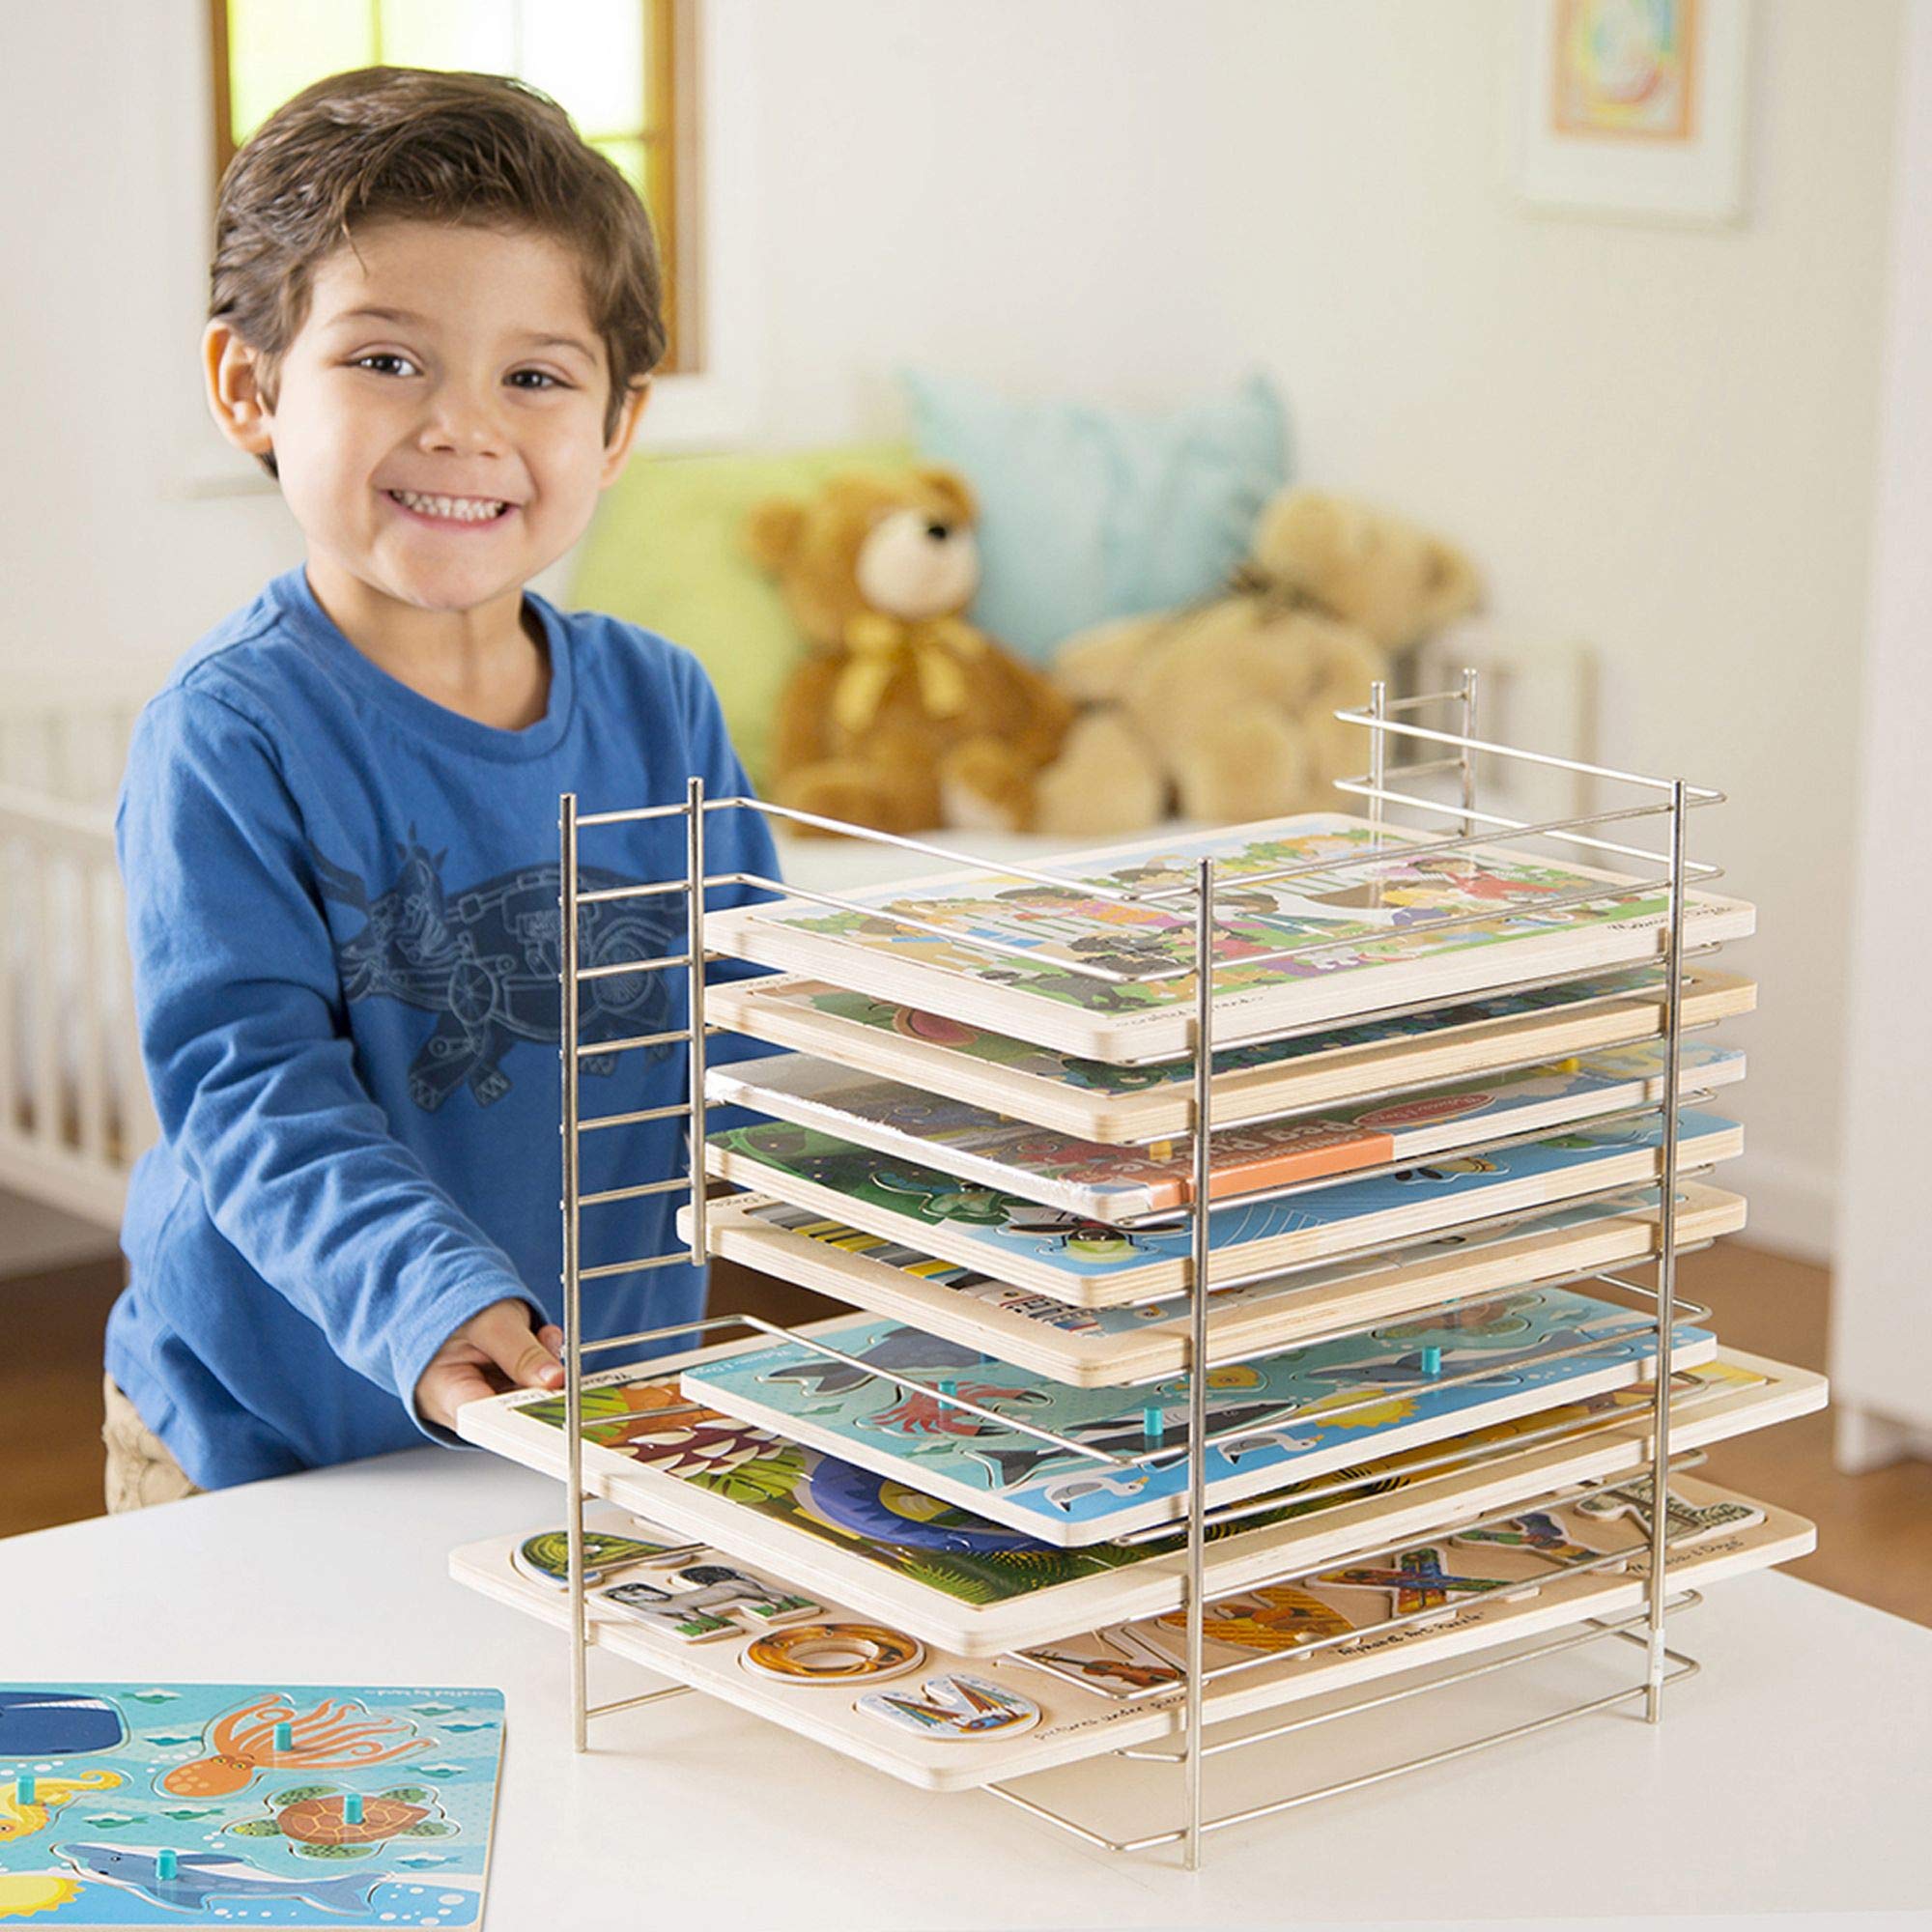 Melissa & Doug Deluxe Metal Wire Puzzle Storage Rack for 12 Small and Large Puzzles - Puzzle Rack Organizer, Puzzle Holder Rack For Kids, Puzzle Organizers And Storage